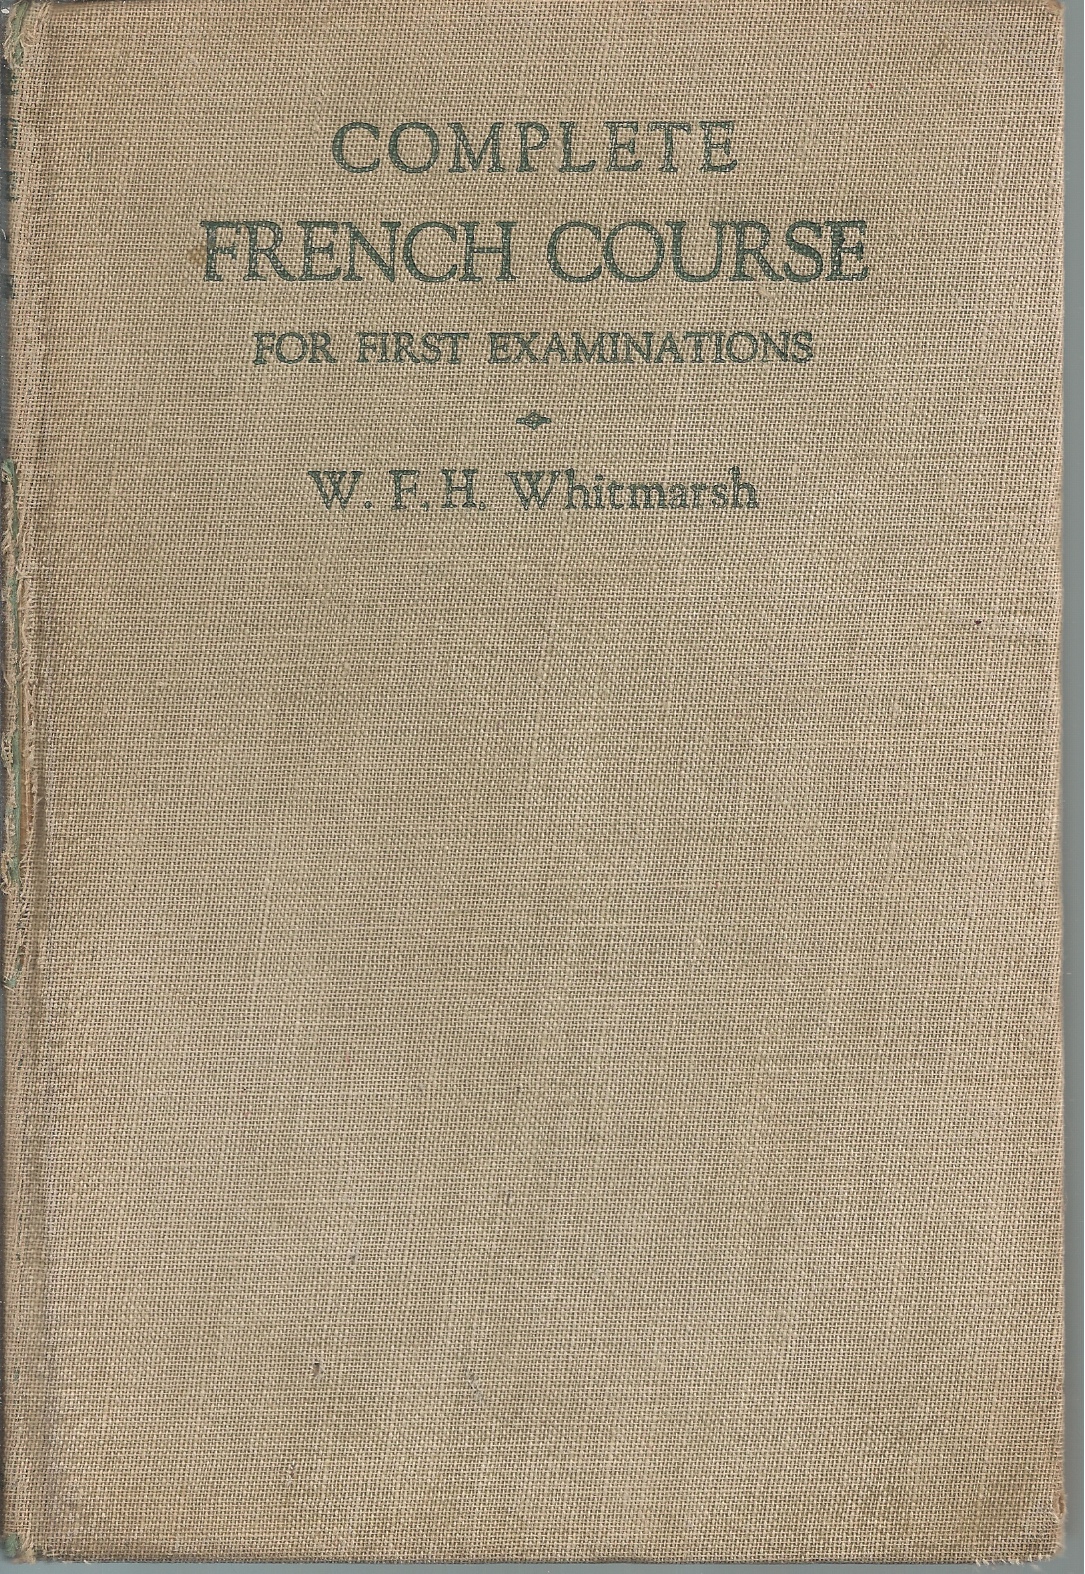 WHITMARSH W.F. H. - Complete French Course for First Examinations